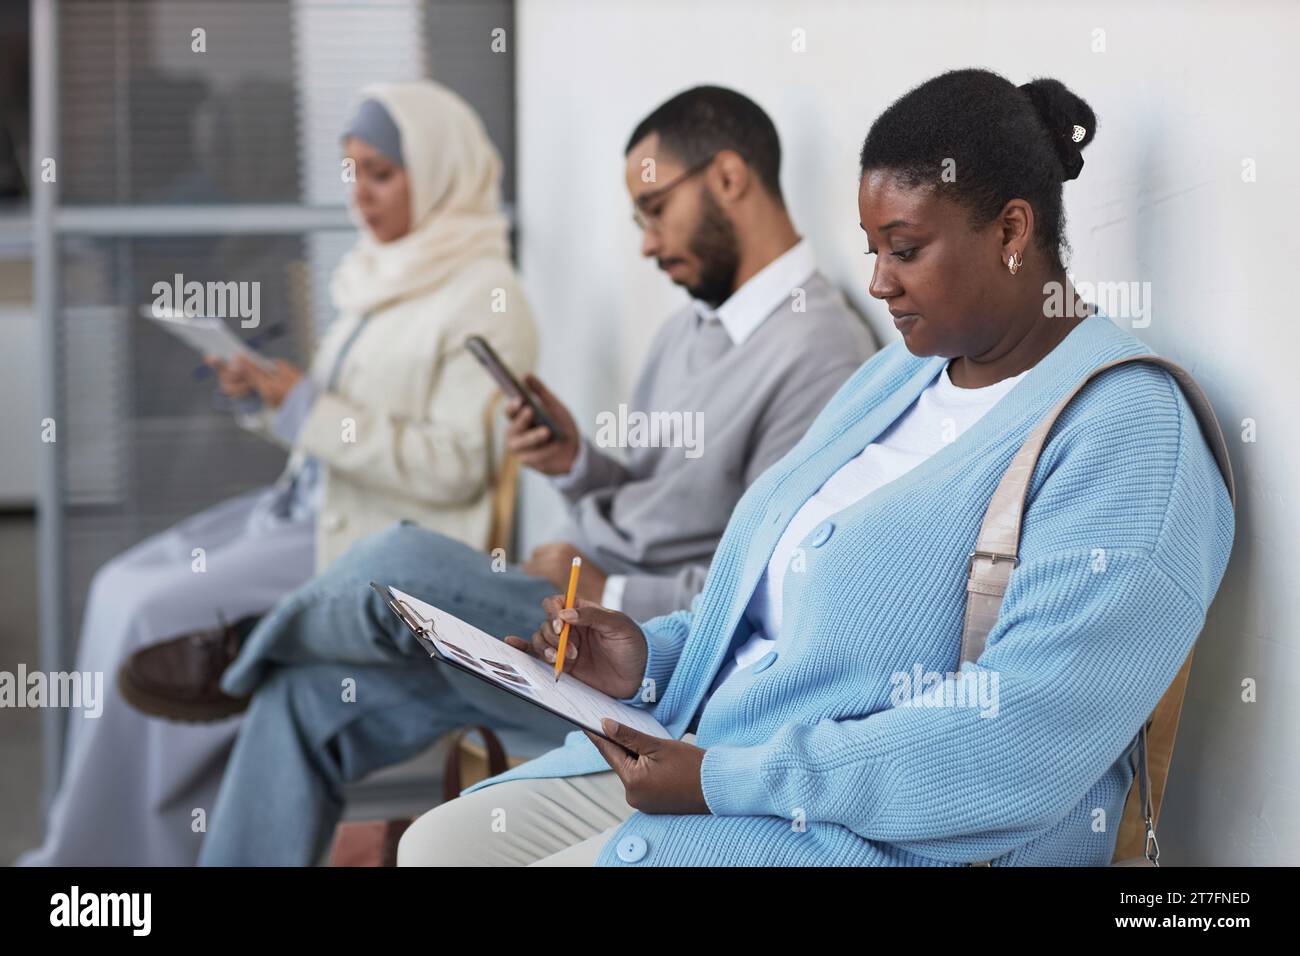 Young African American female applicant pointing at filled form while sitting against other people and checking personal data Stock Photo